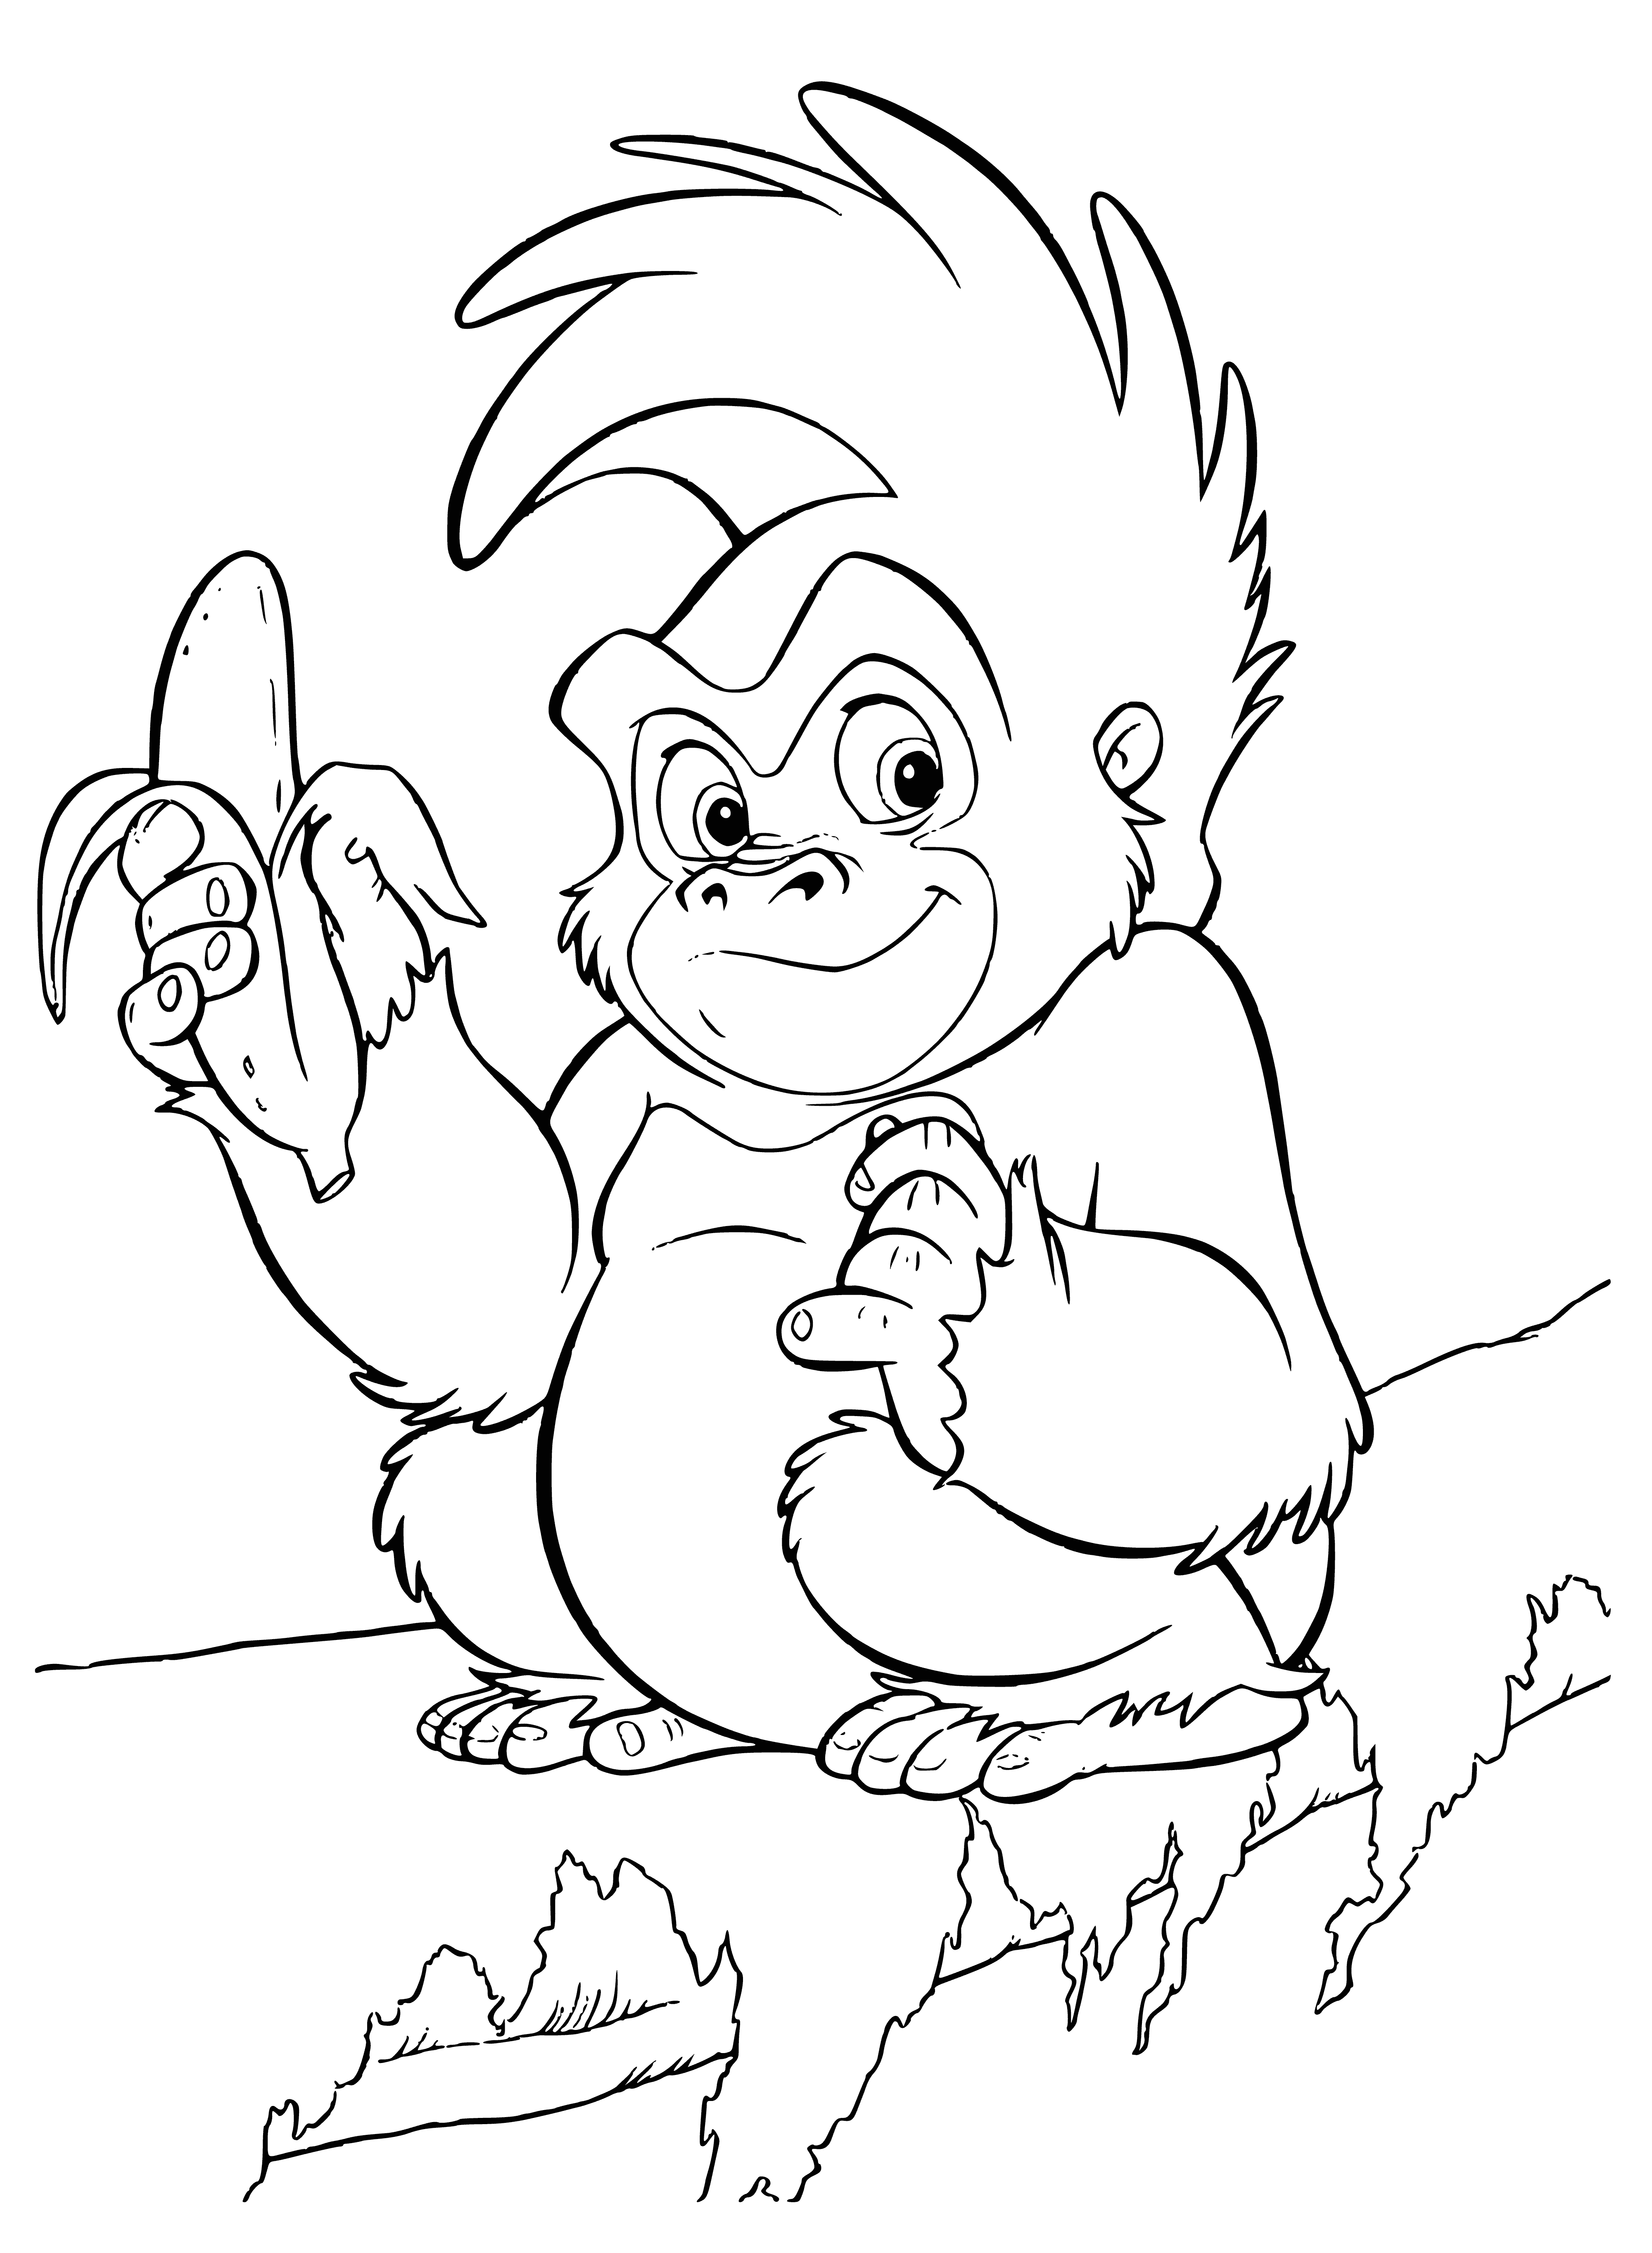 coloring page: Monkey sits on tree branch, tan fur/long tail, brown face/long snout, black eyes/open mouth showing teeth.